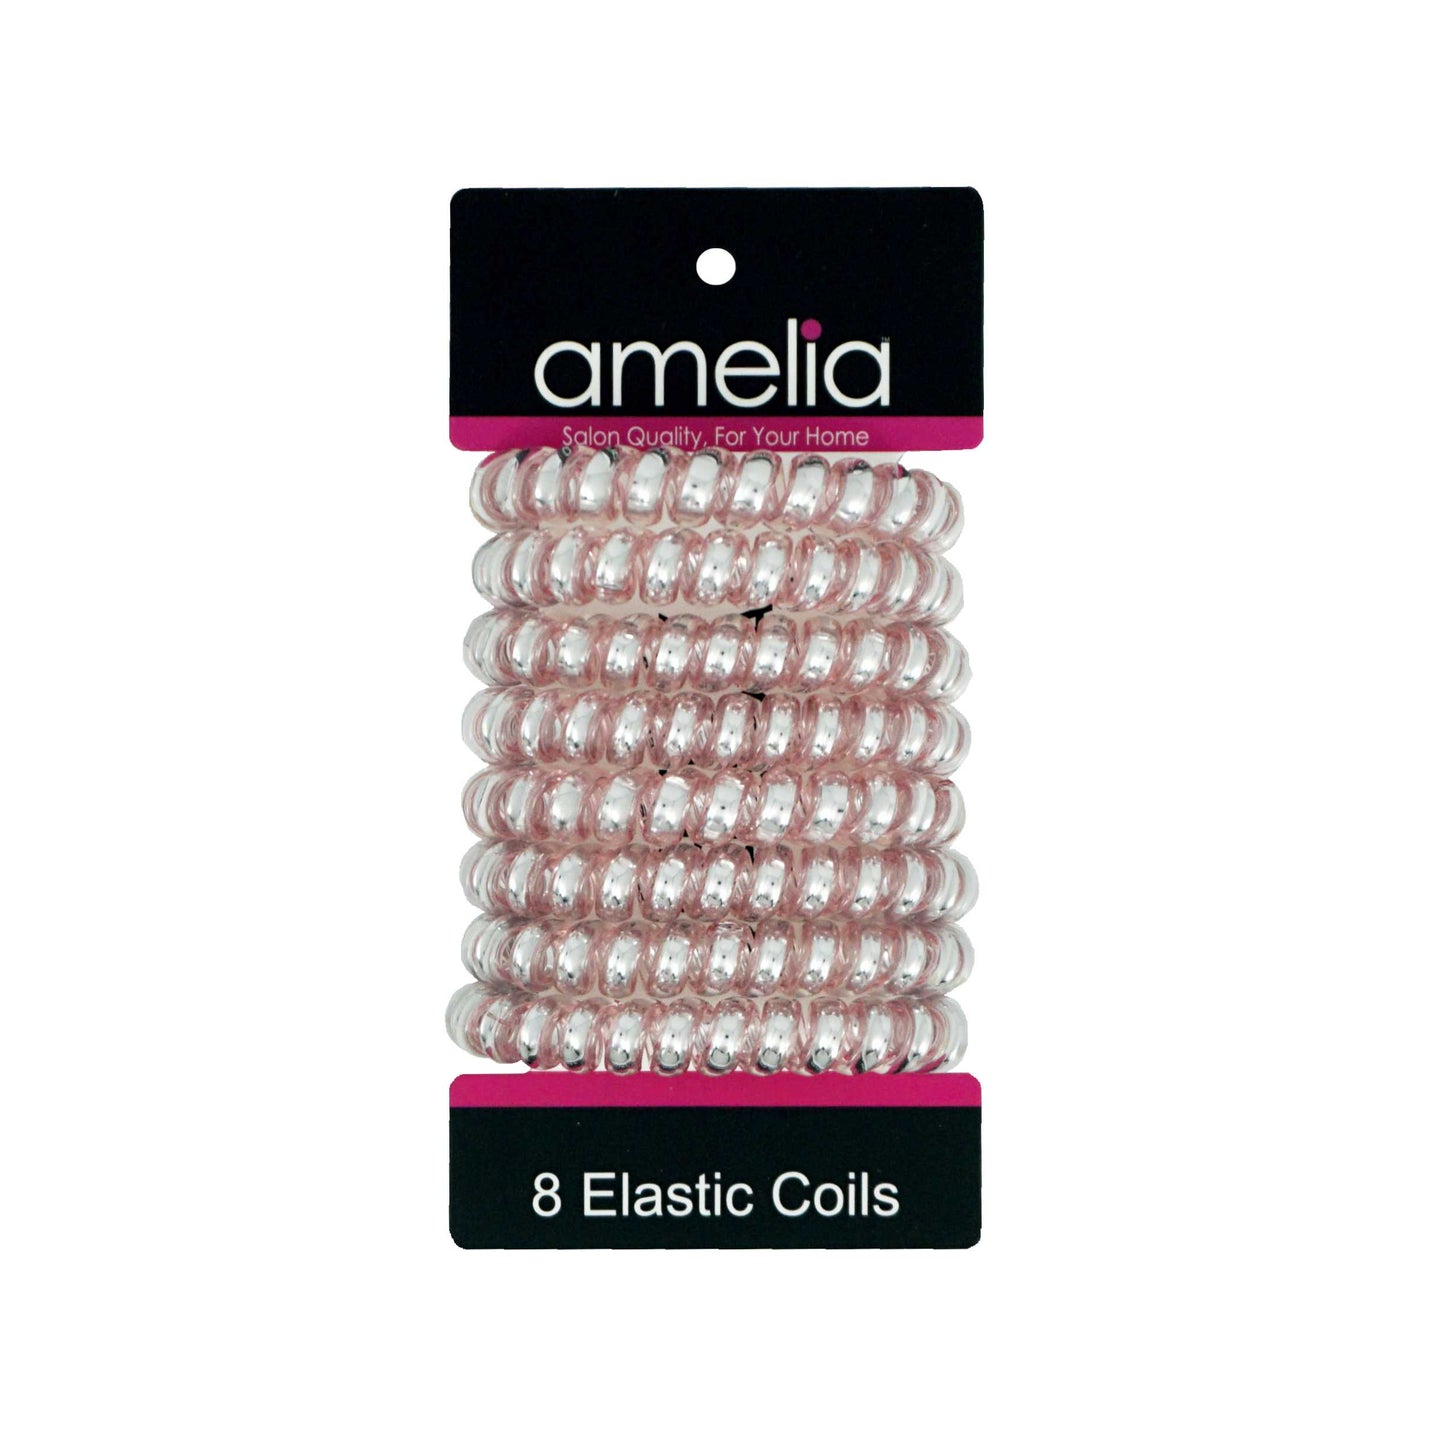 Amelia Beauty Products 8 Large Smooth Shiny Center Elastic Hair Coils, 2. 5in Diameter Thick Spiral Hair Ties, Gentle on Hair, Strong Hold and Minimizes Dents and Creases, Pink